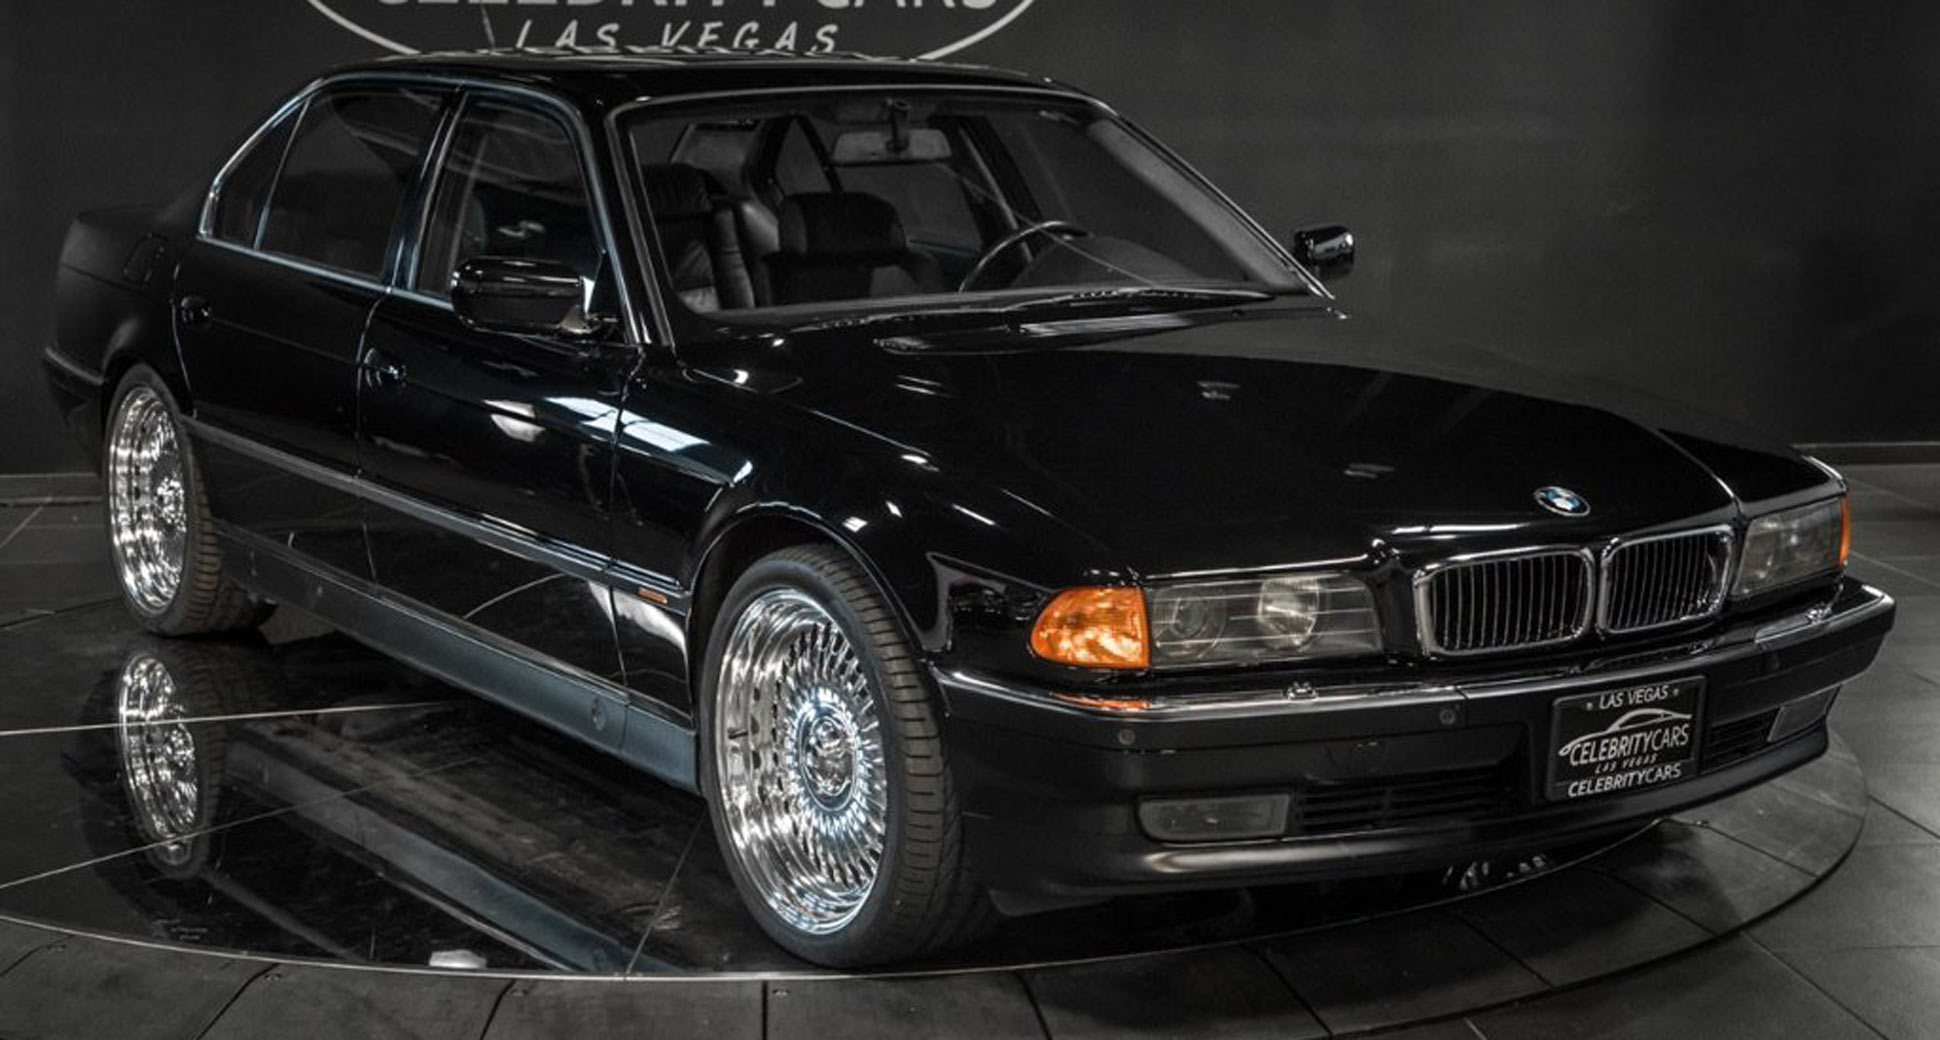 The BMW 750iL That Tupac Was Shot Still Available For Sale, Only Now It ...